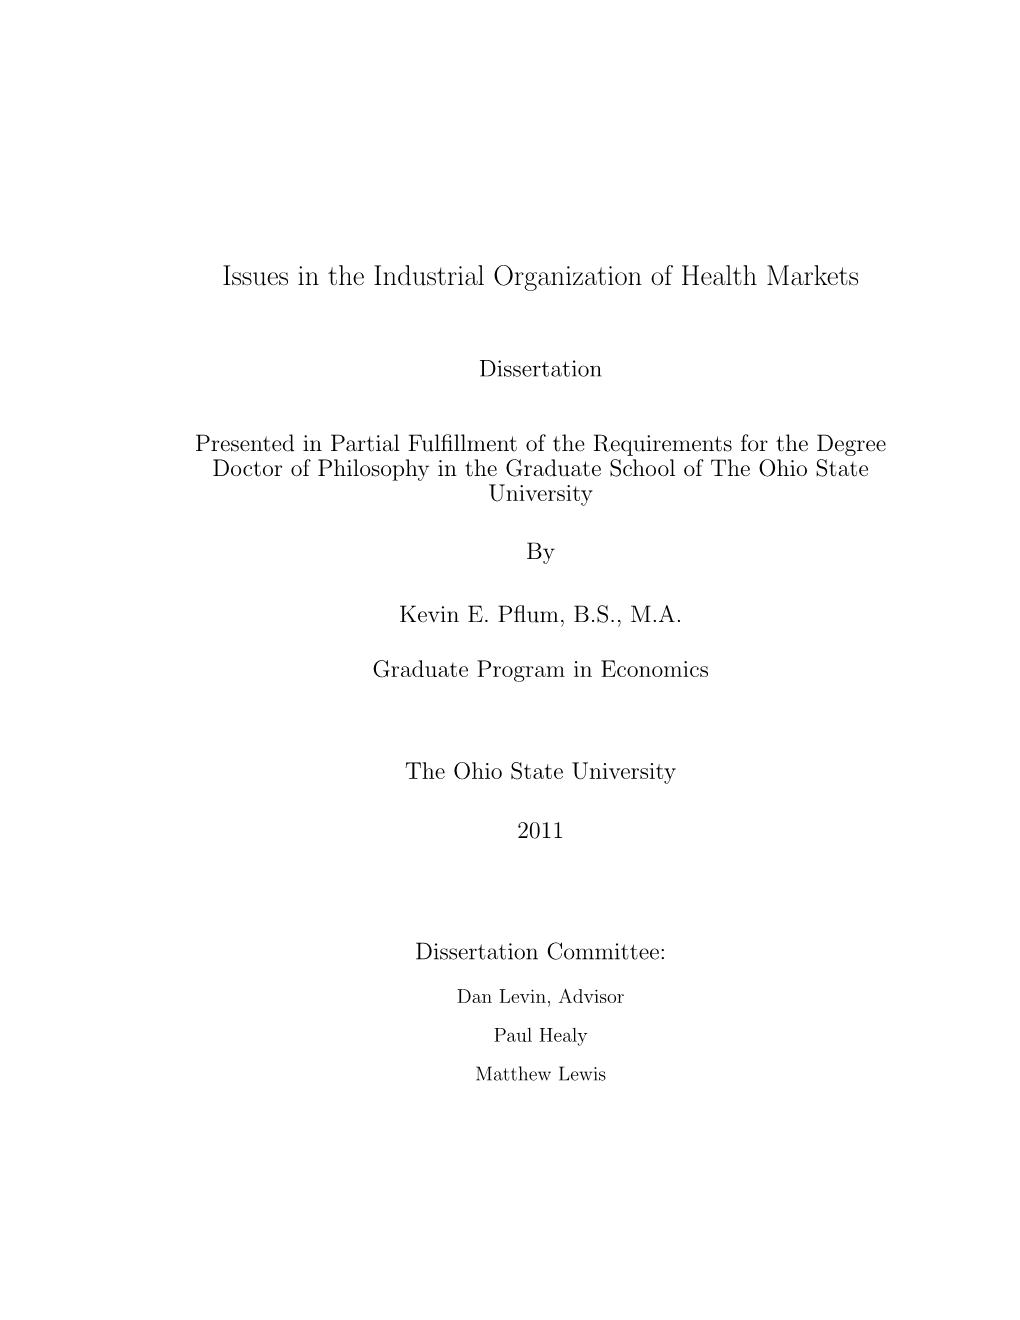 Issues in the Industrial Organization of Health Markets